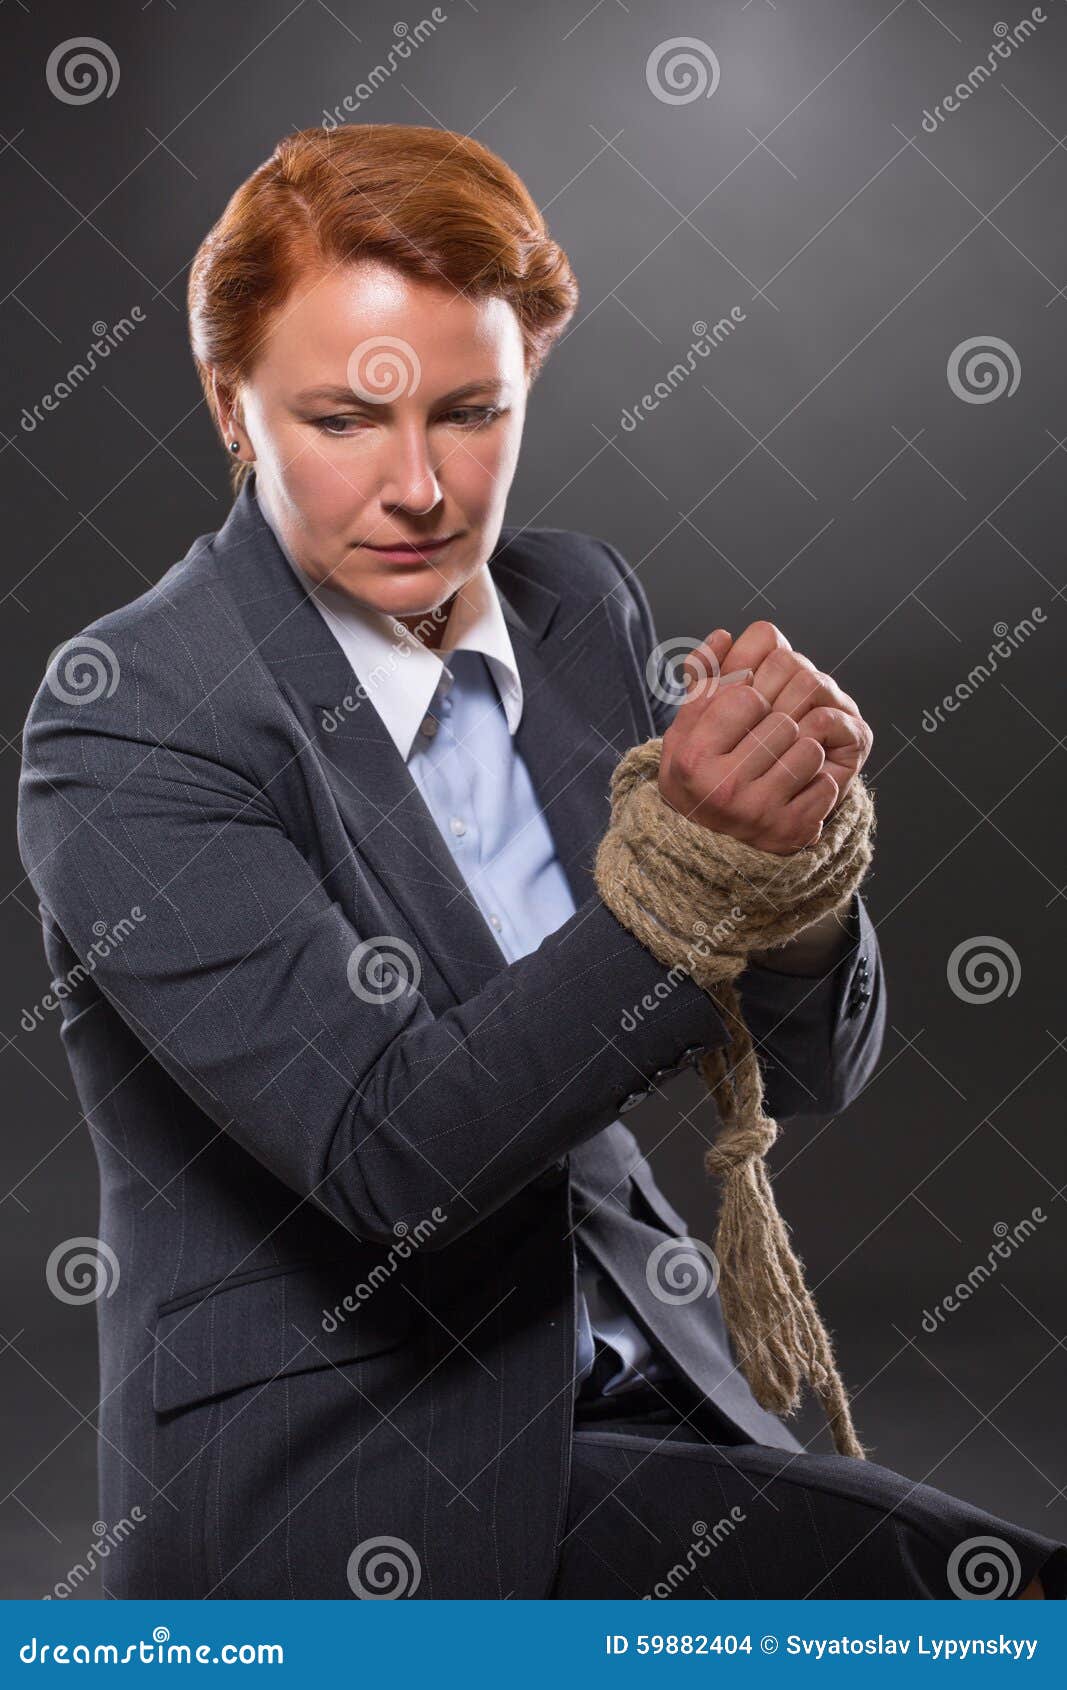 Businesswoman S Hands Tied Up with Rope Stock Photo - Image of toughness,  hand: 59882404